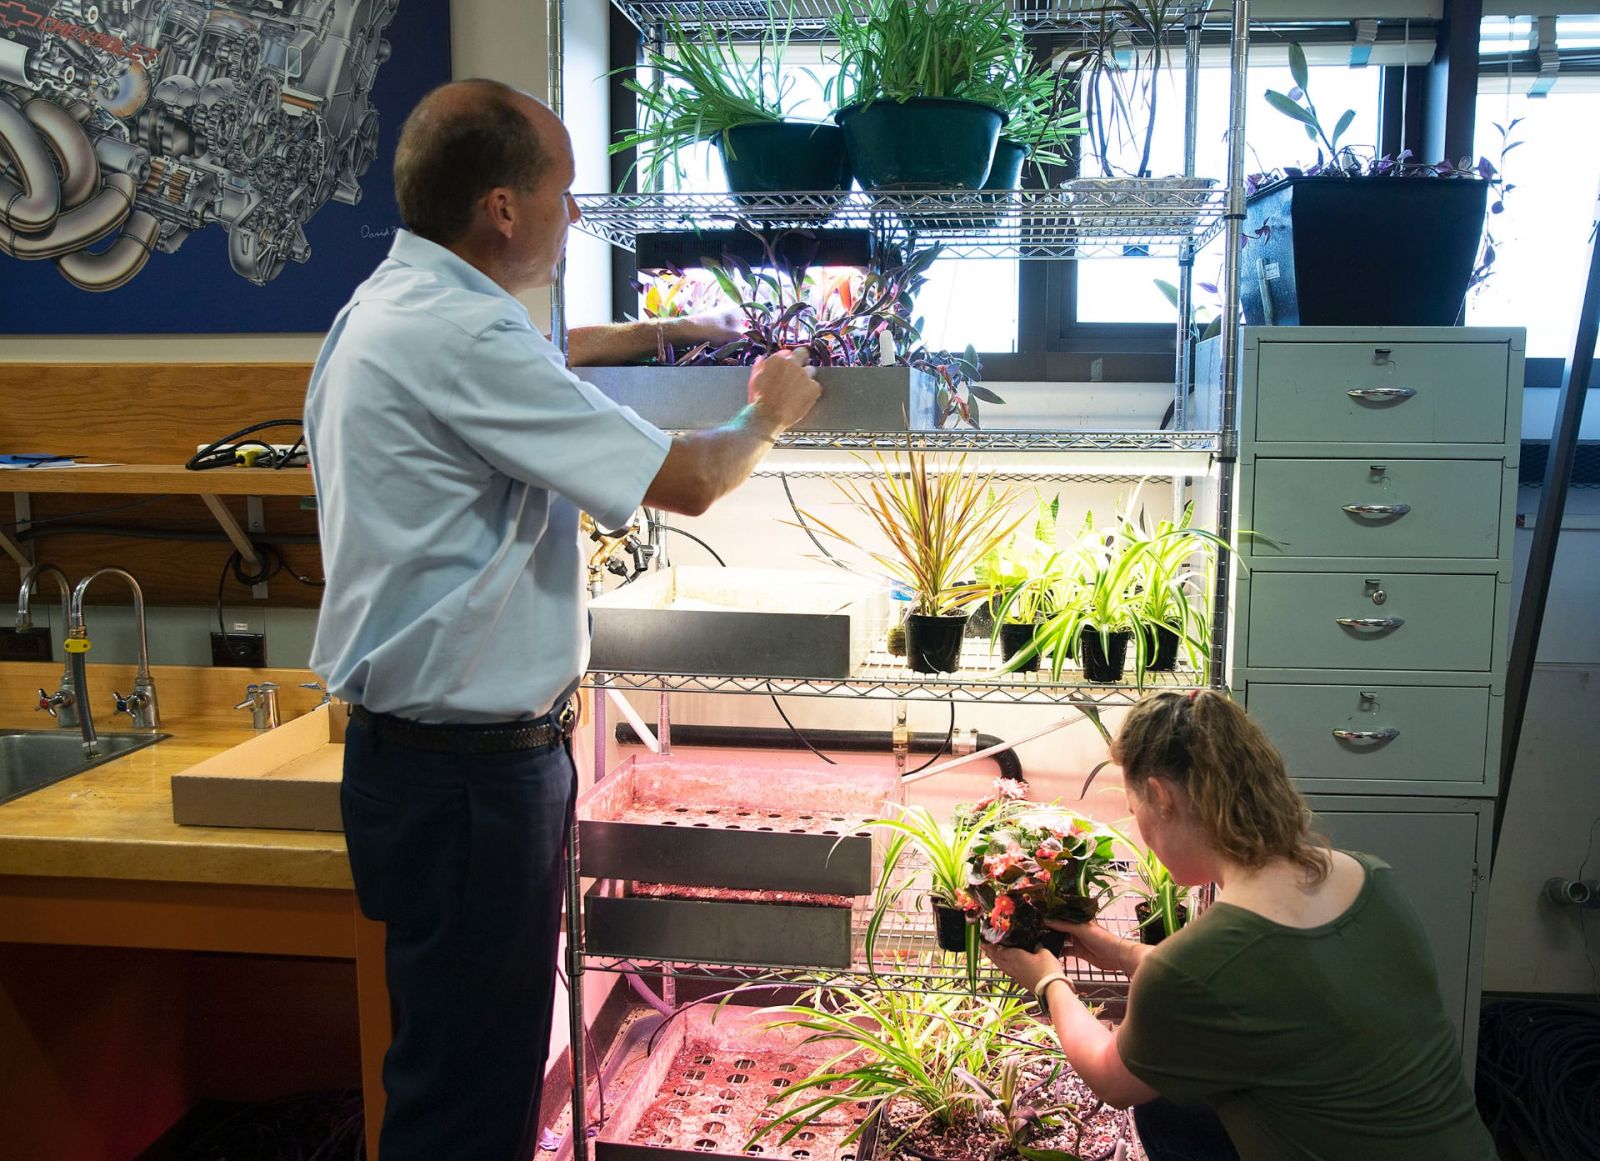 Bill Hutzel, professor of mechanical engineering technology, and Danielle LeClerc, an undergraduate student who works on the Biowall team, are inspecting the plants used for the project. (Purdue Research Foundation image/Hope Sale)